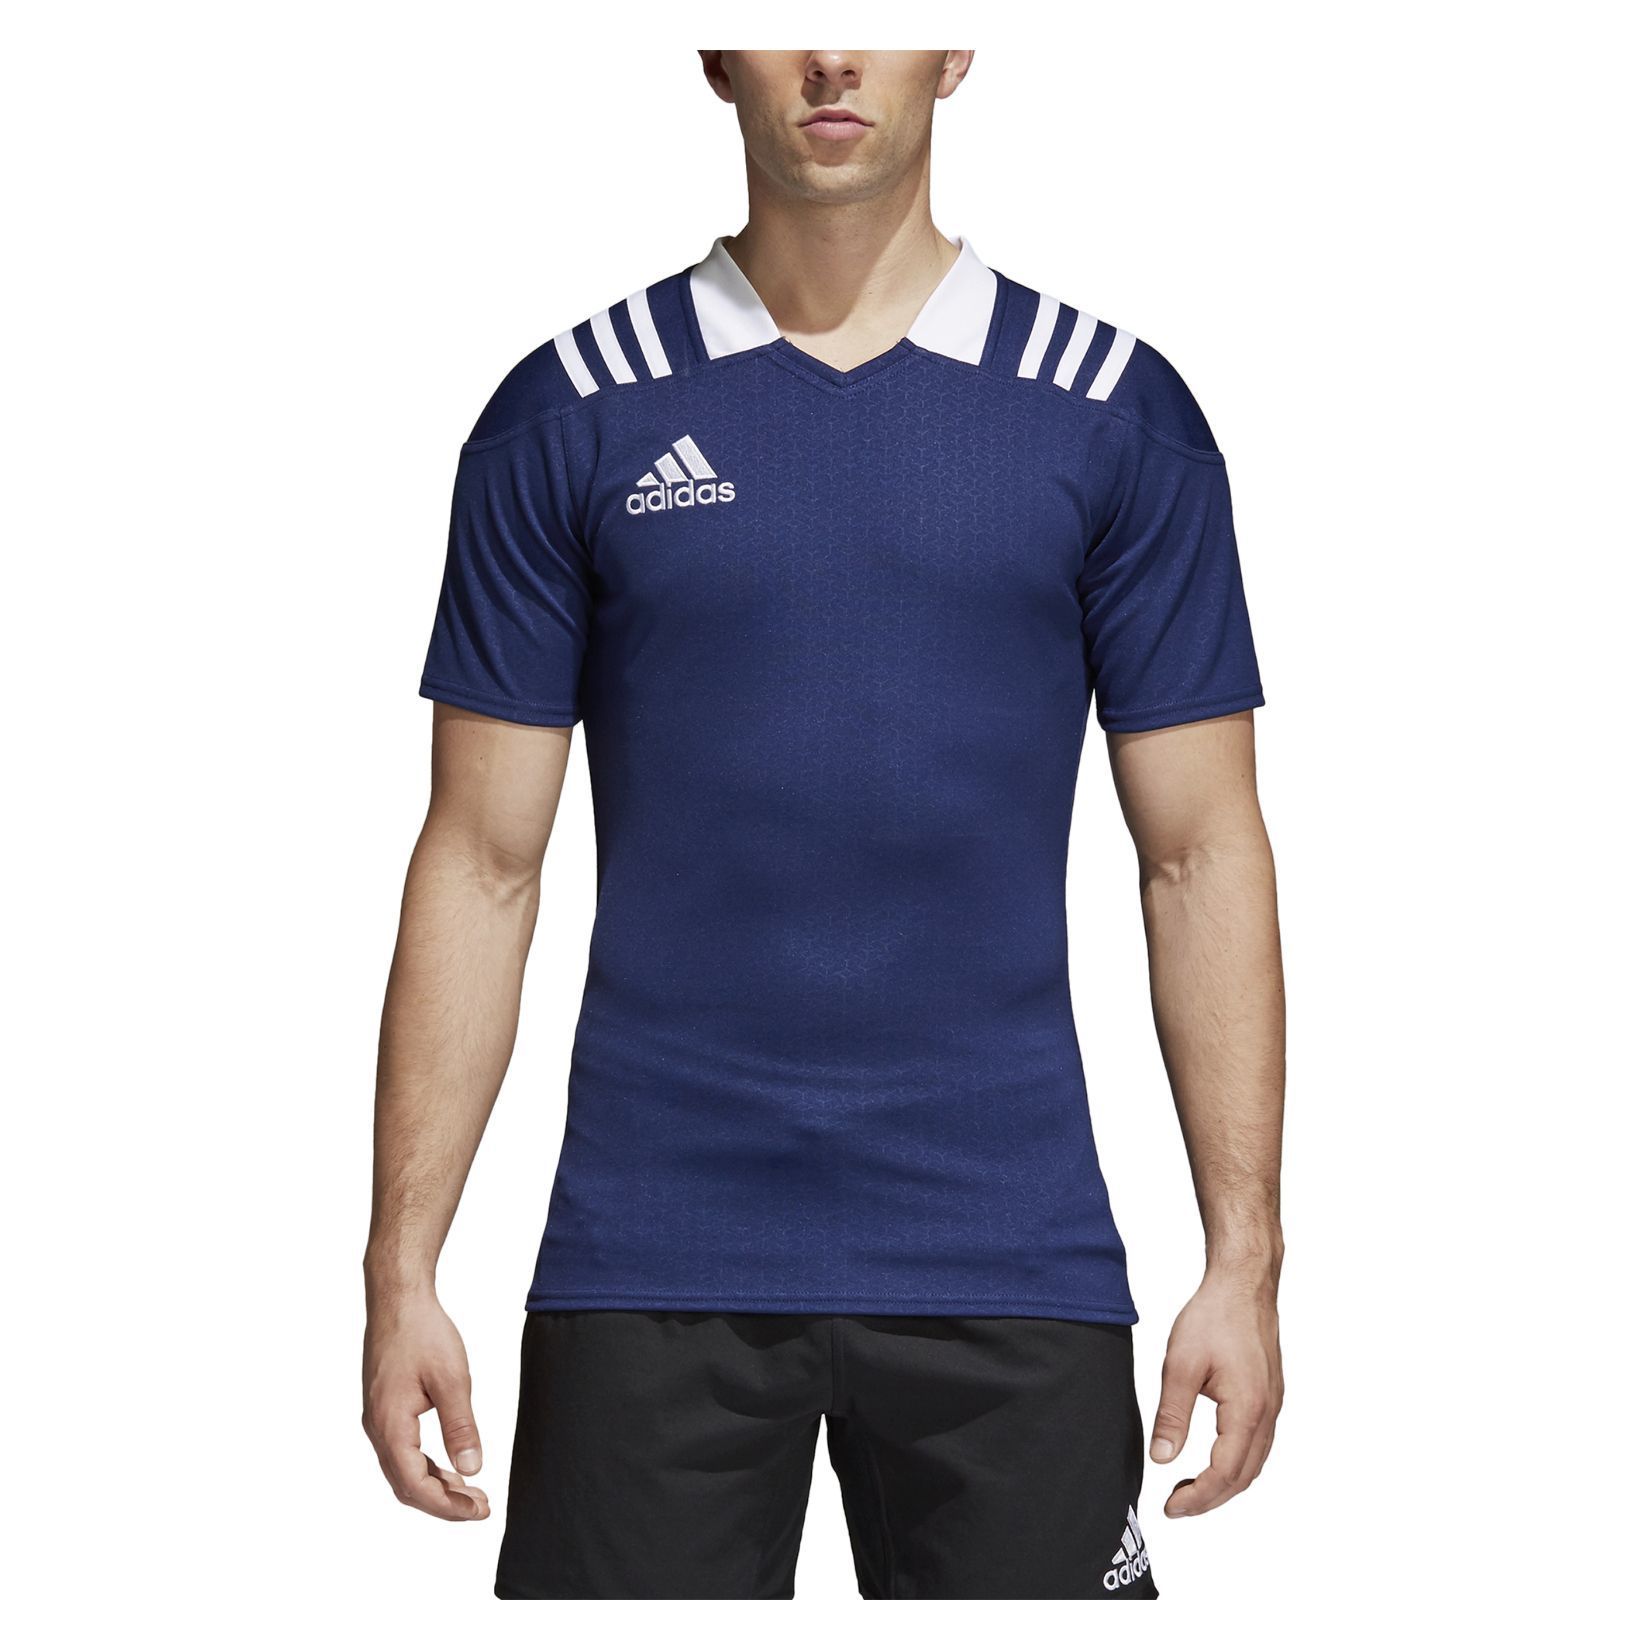 adidas 3 Stripes Fitted Rugby Jersey - Kitlocker.com